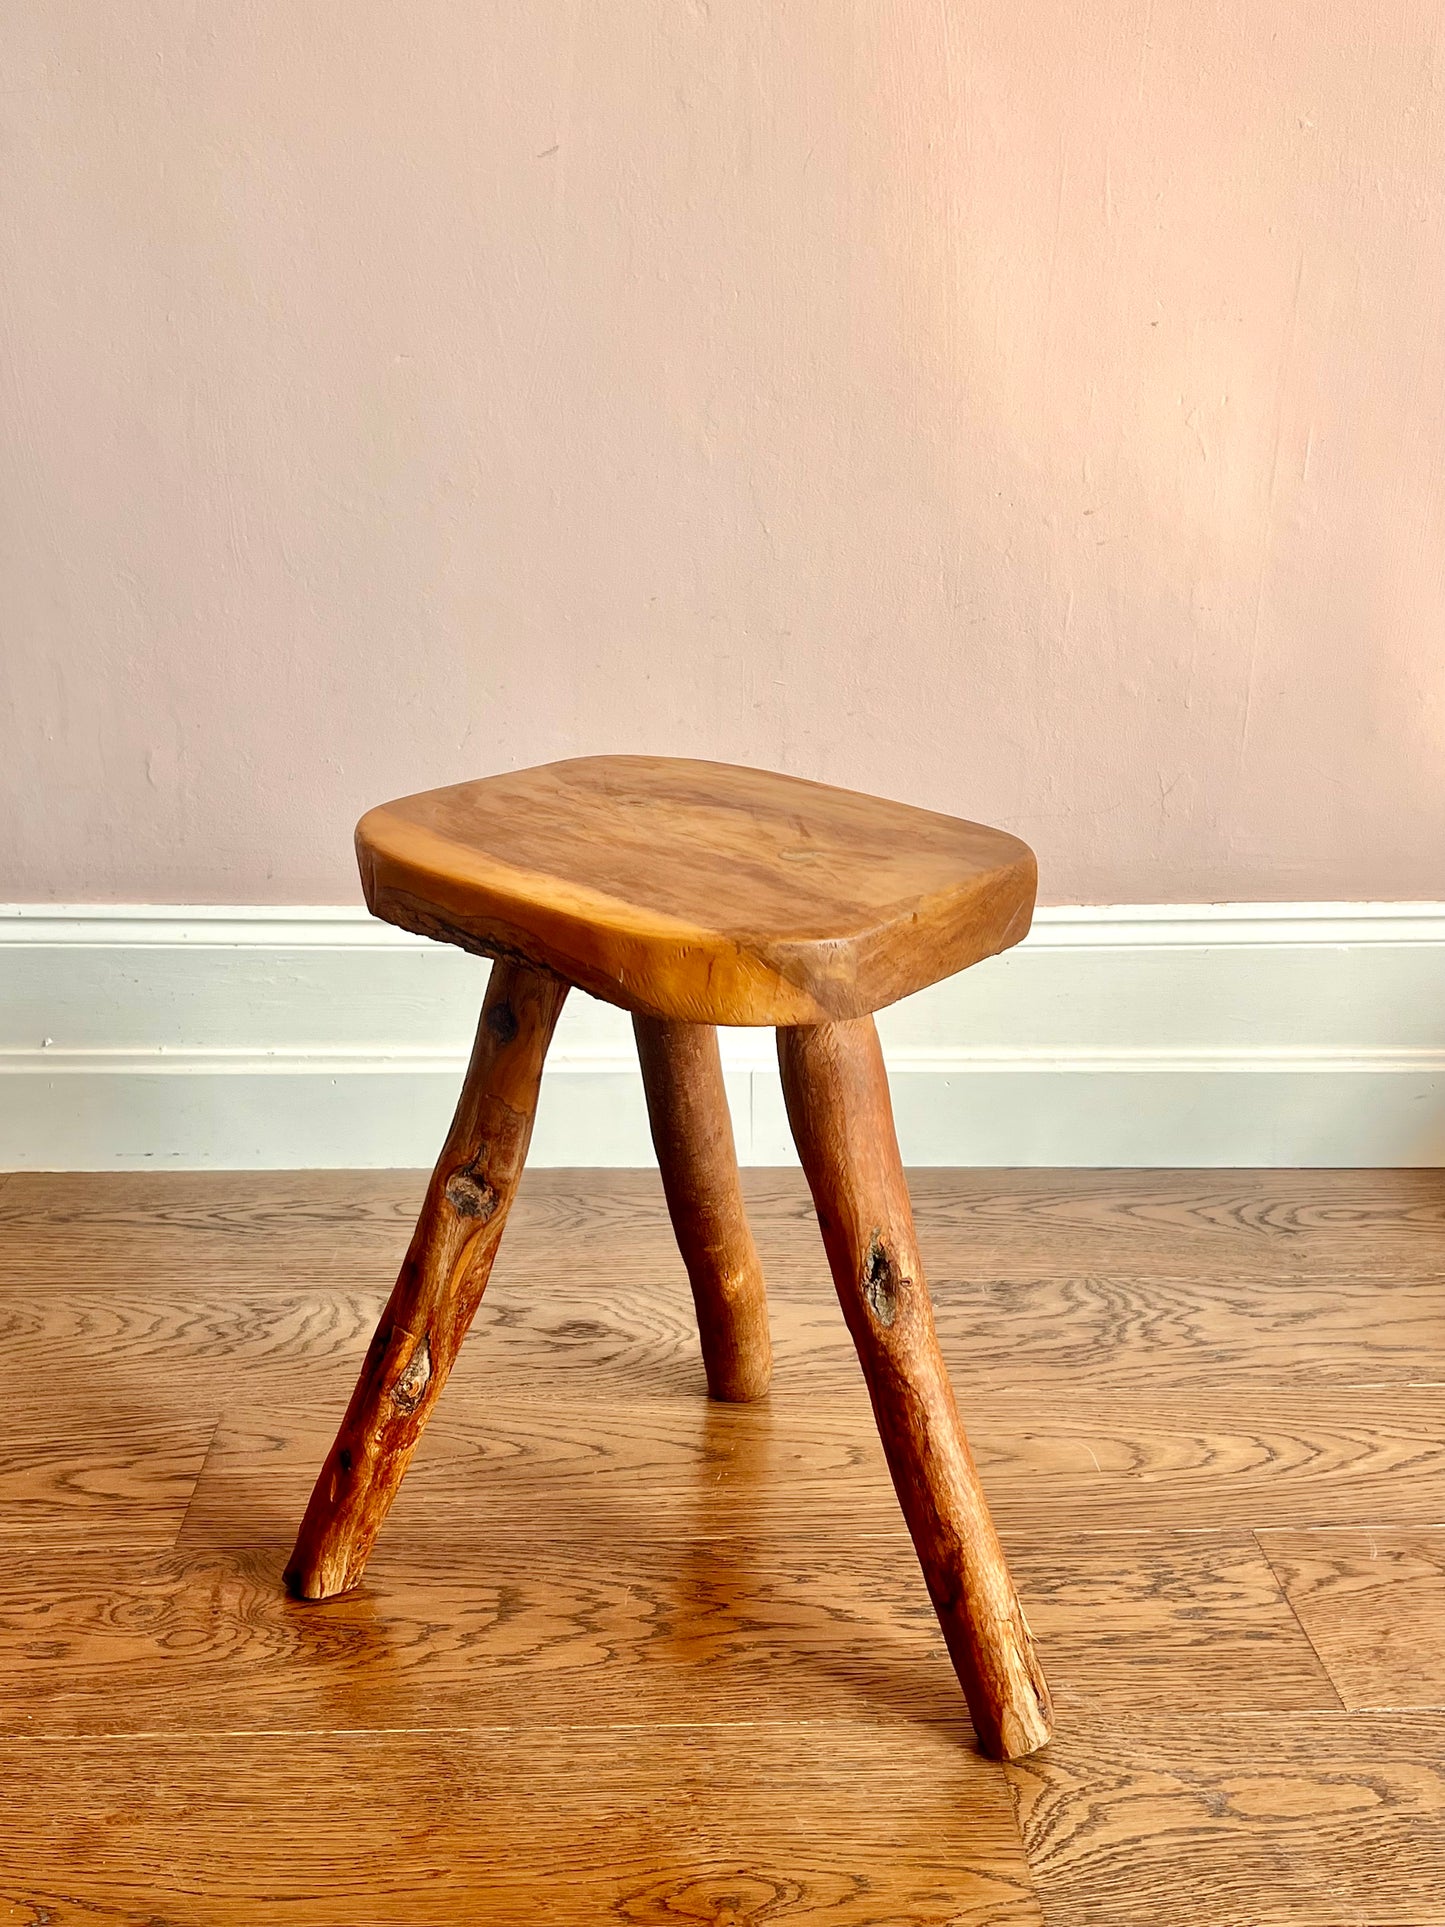 1960s French Primitive Brutalist Tripod Stool (One of Two Available)